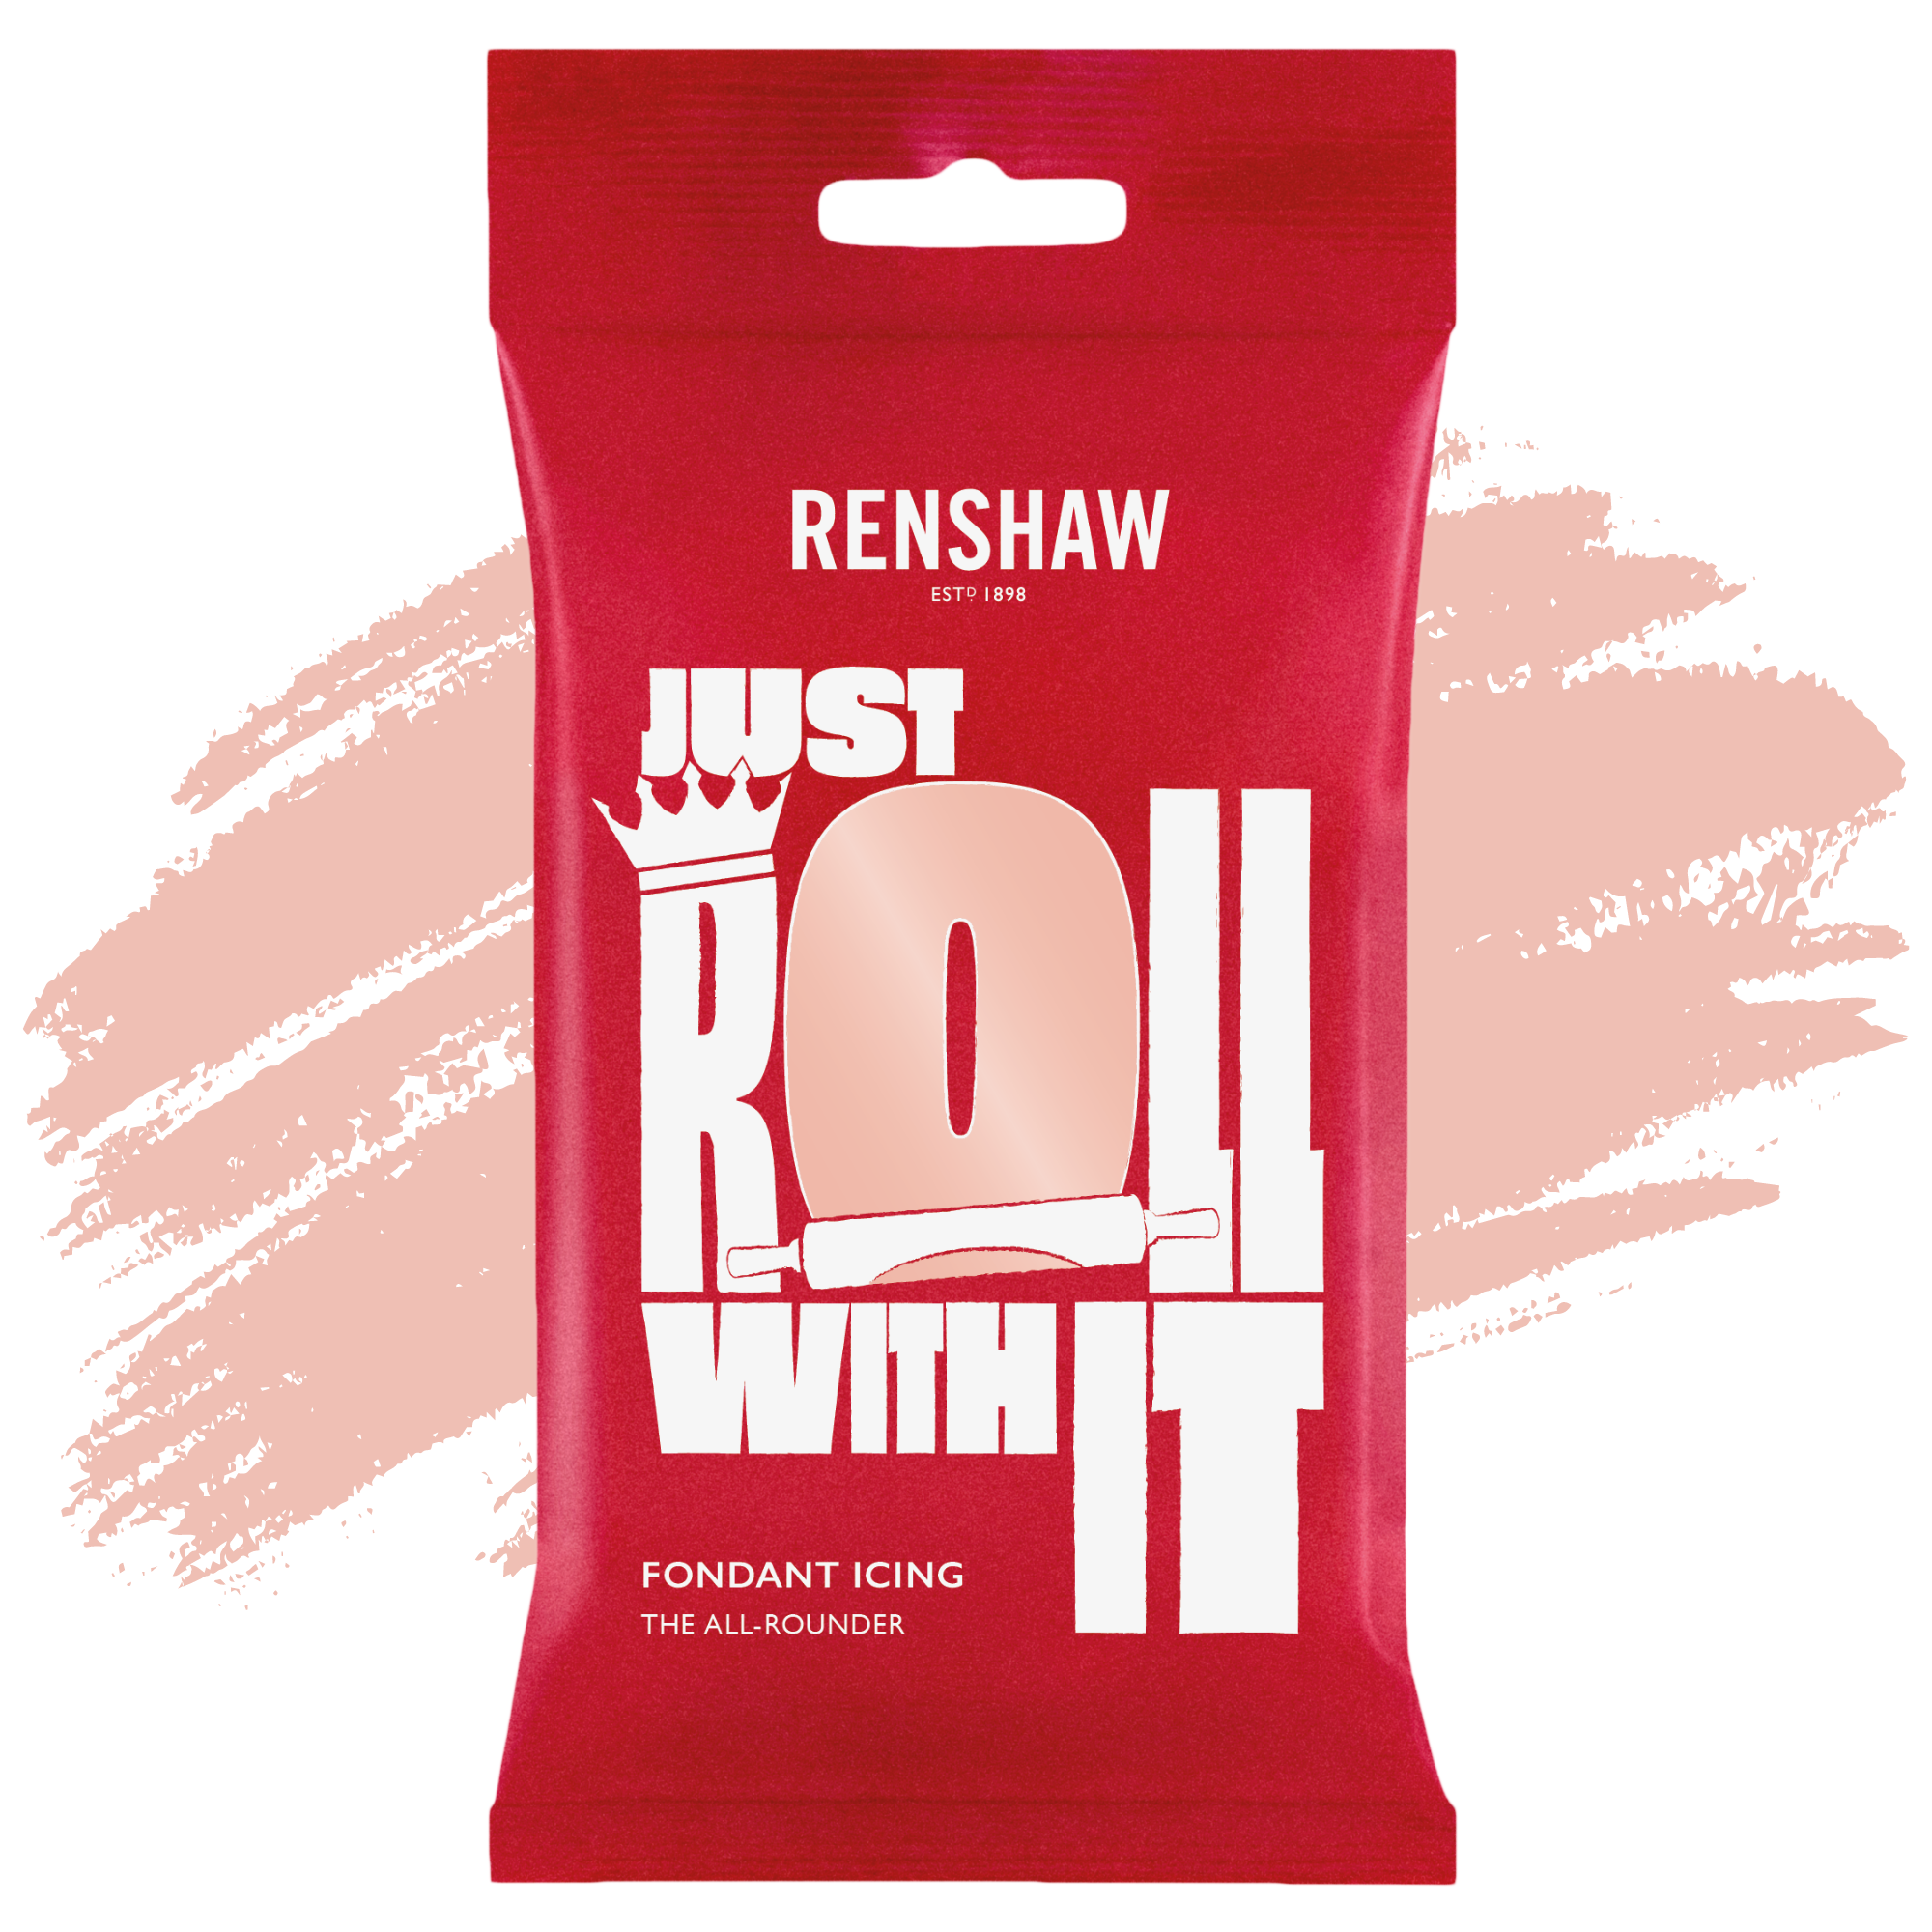 Renshaw Professional Sugar Paste Ready to Roll Fondant Just Roll with it Icing - Peach Blush - 250g